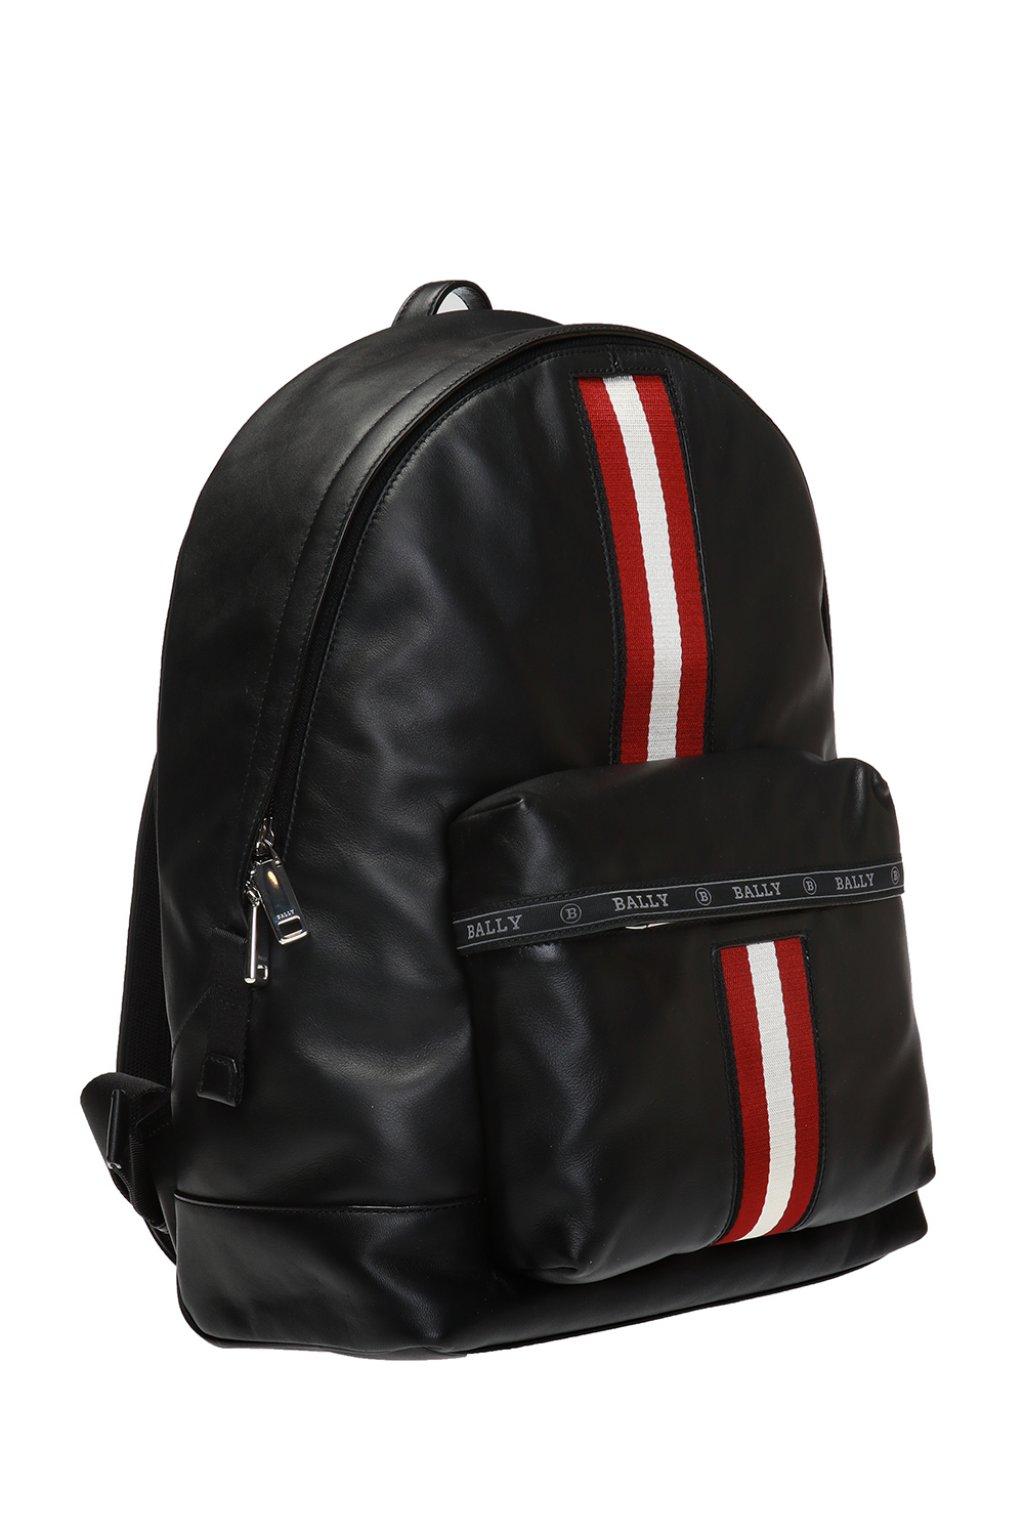 Bally Leather 'harper' Backpack With Logo in Black for Men - Lyst